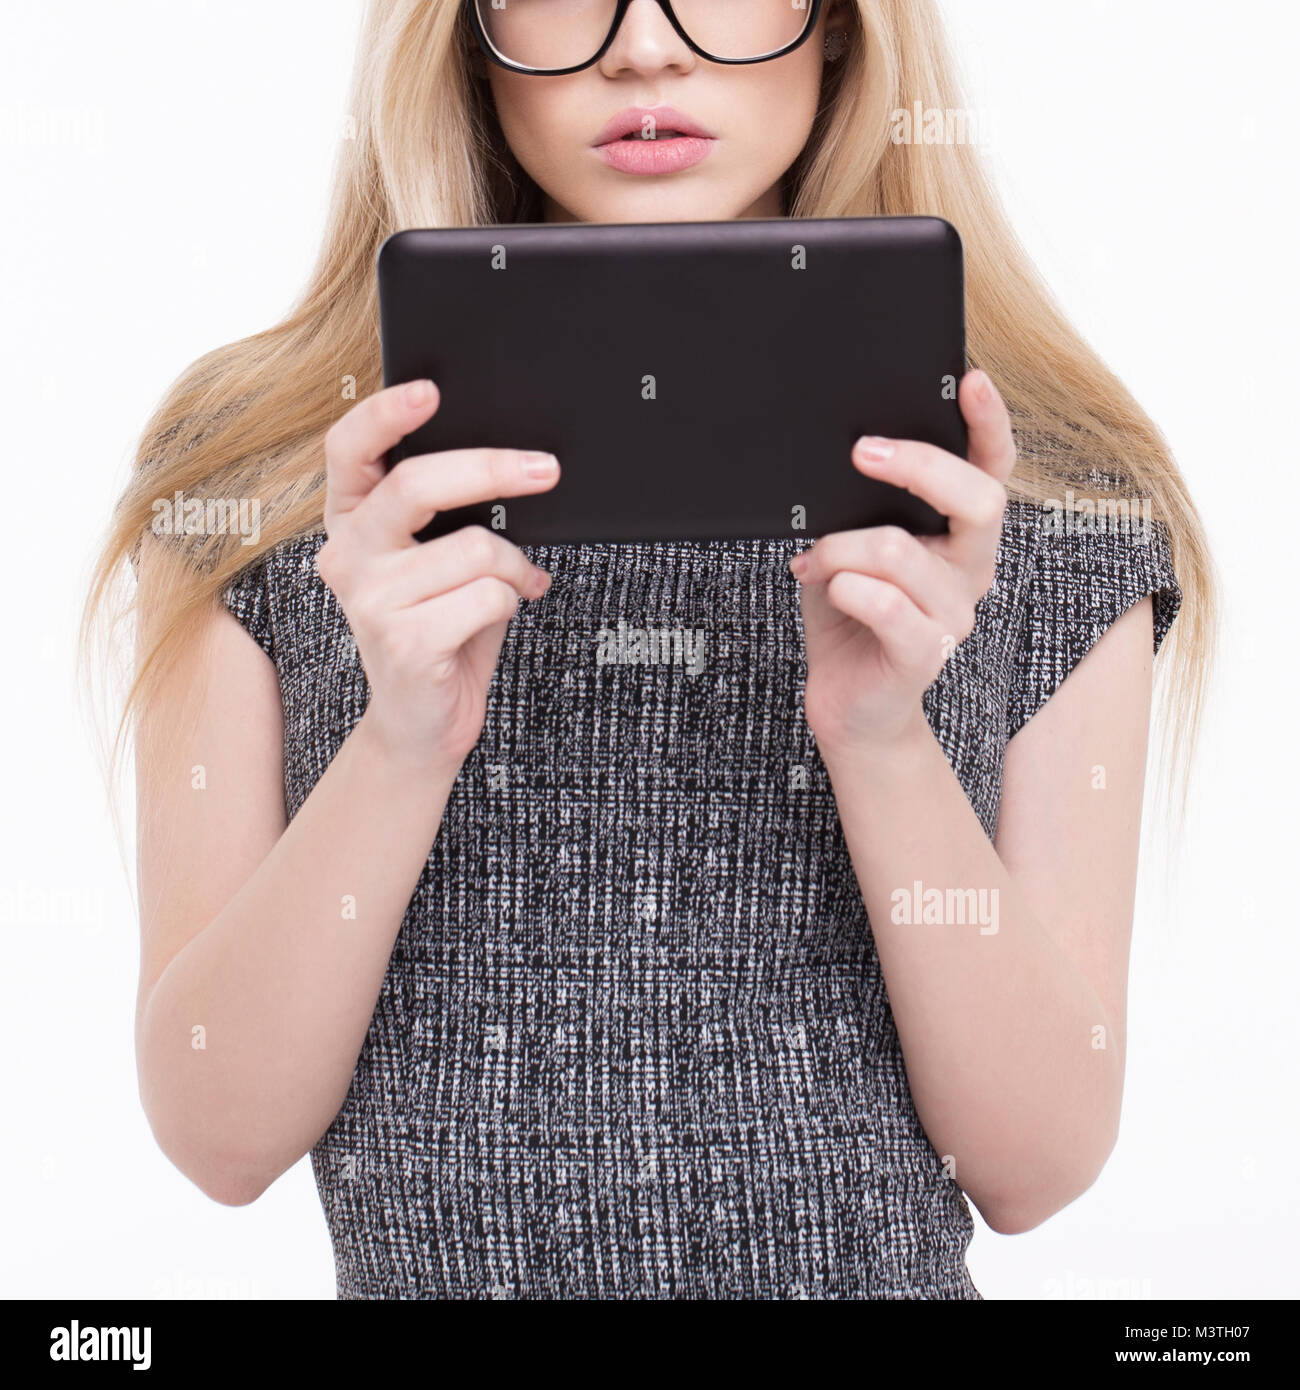 Young blonde woman reading on tablet closeup Banque D'Images